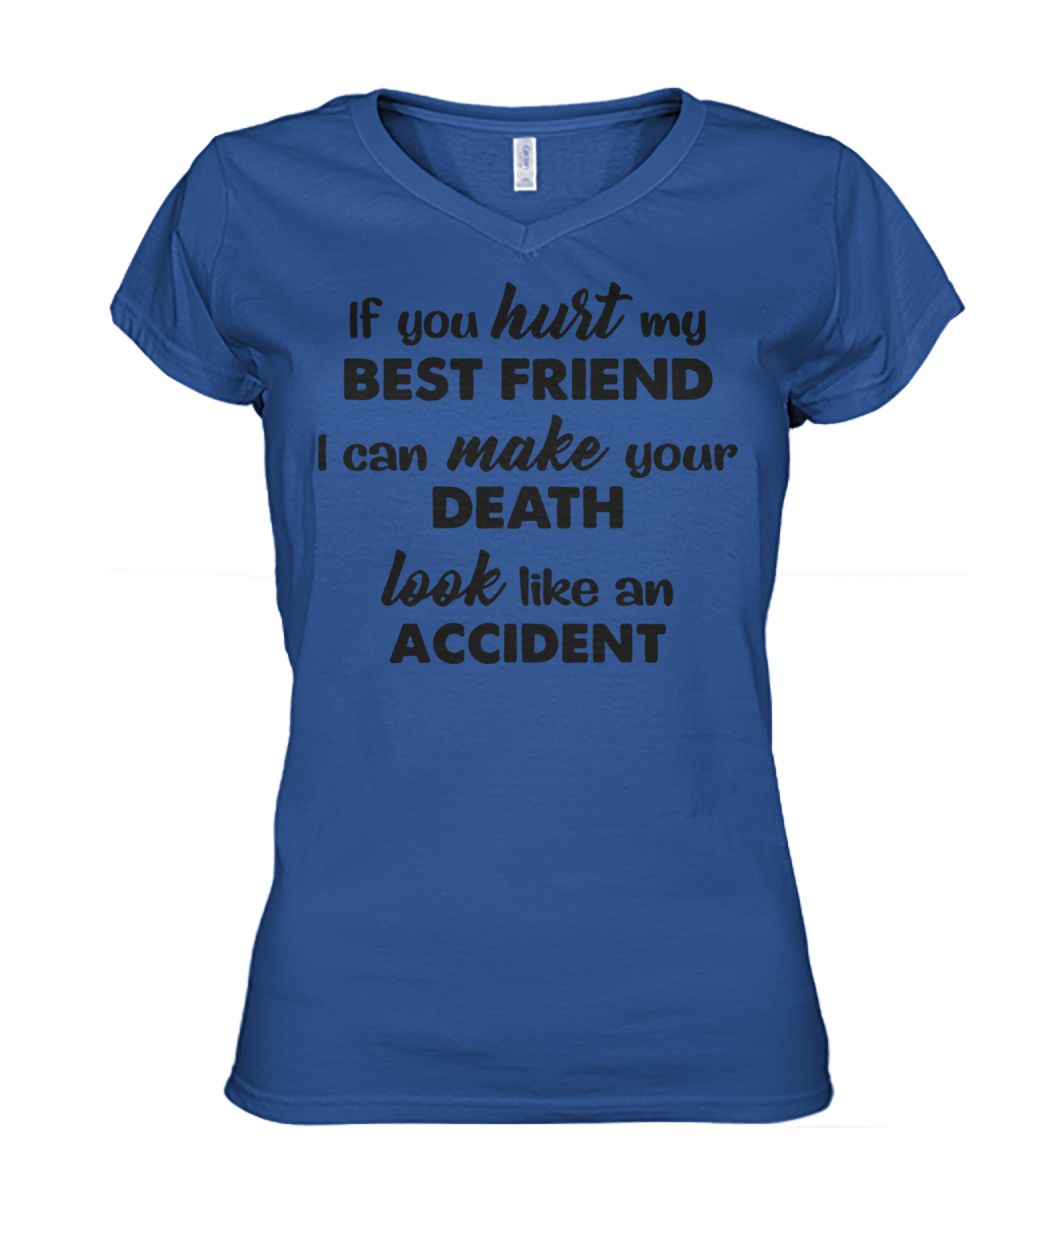 If you hurt my best friend I can make your death look like an accident women's v-neck